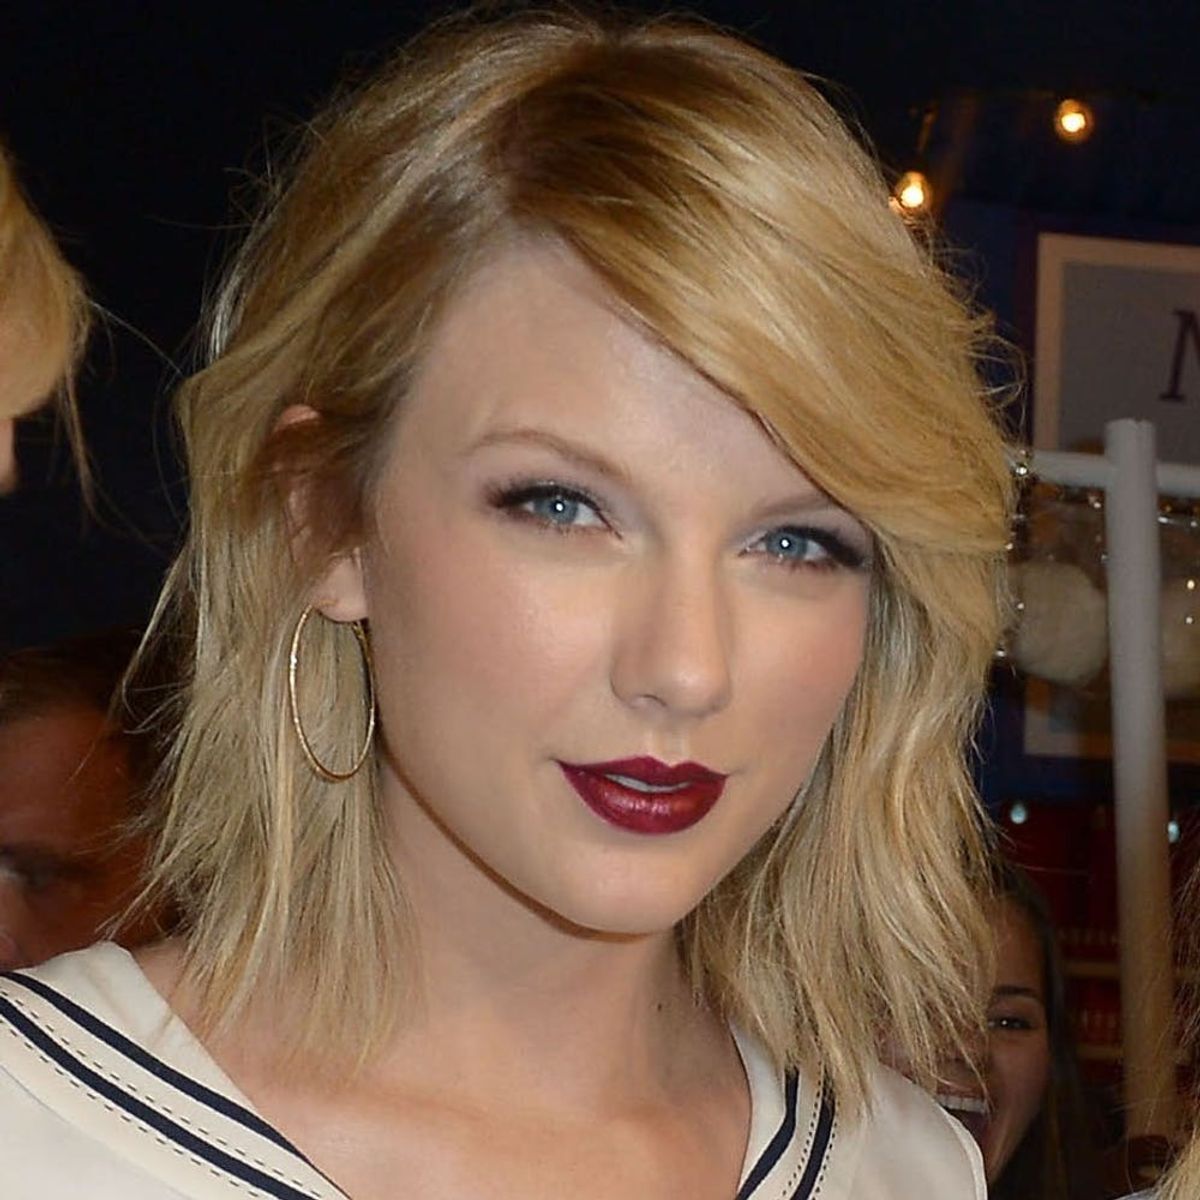 Taylor Swift Just Dropped ANOTHER New Single and Fans Think It’s All About BF Joe Alwyn